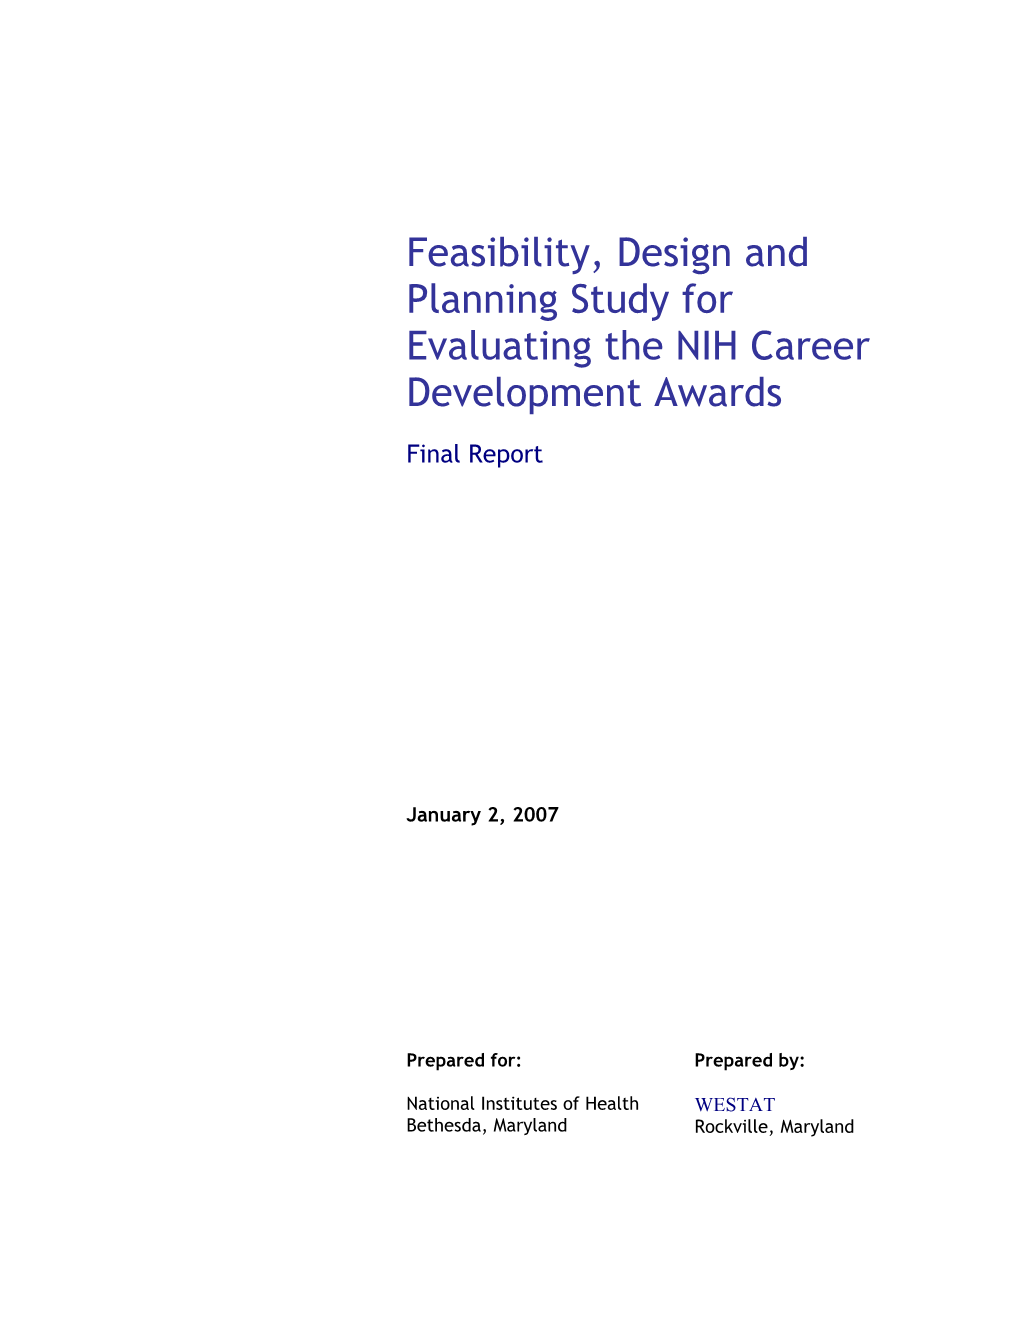 Feasibility, Design and Planning Study for Evaluating the NIH Career Development Awards